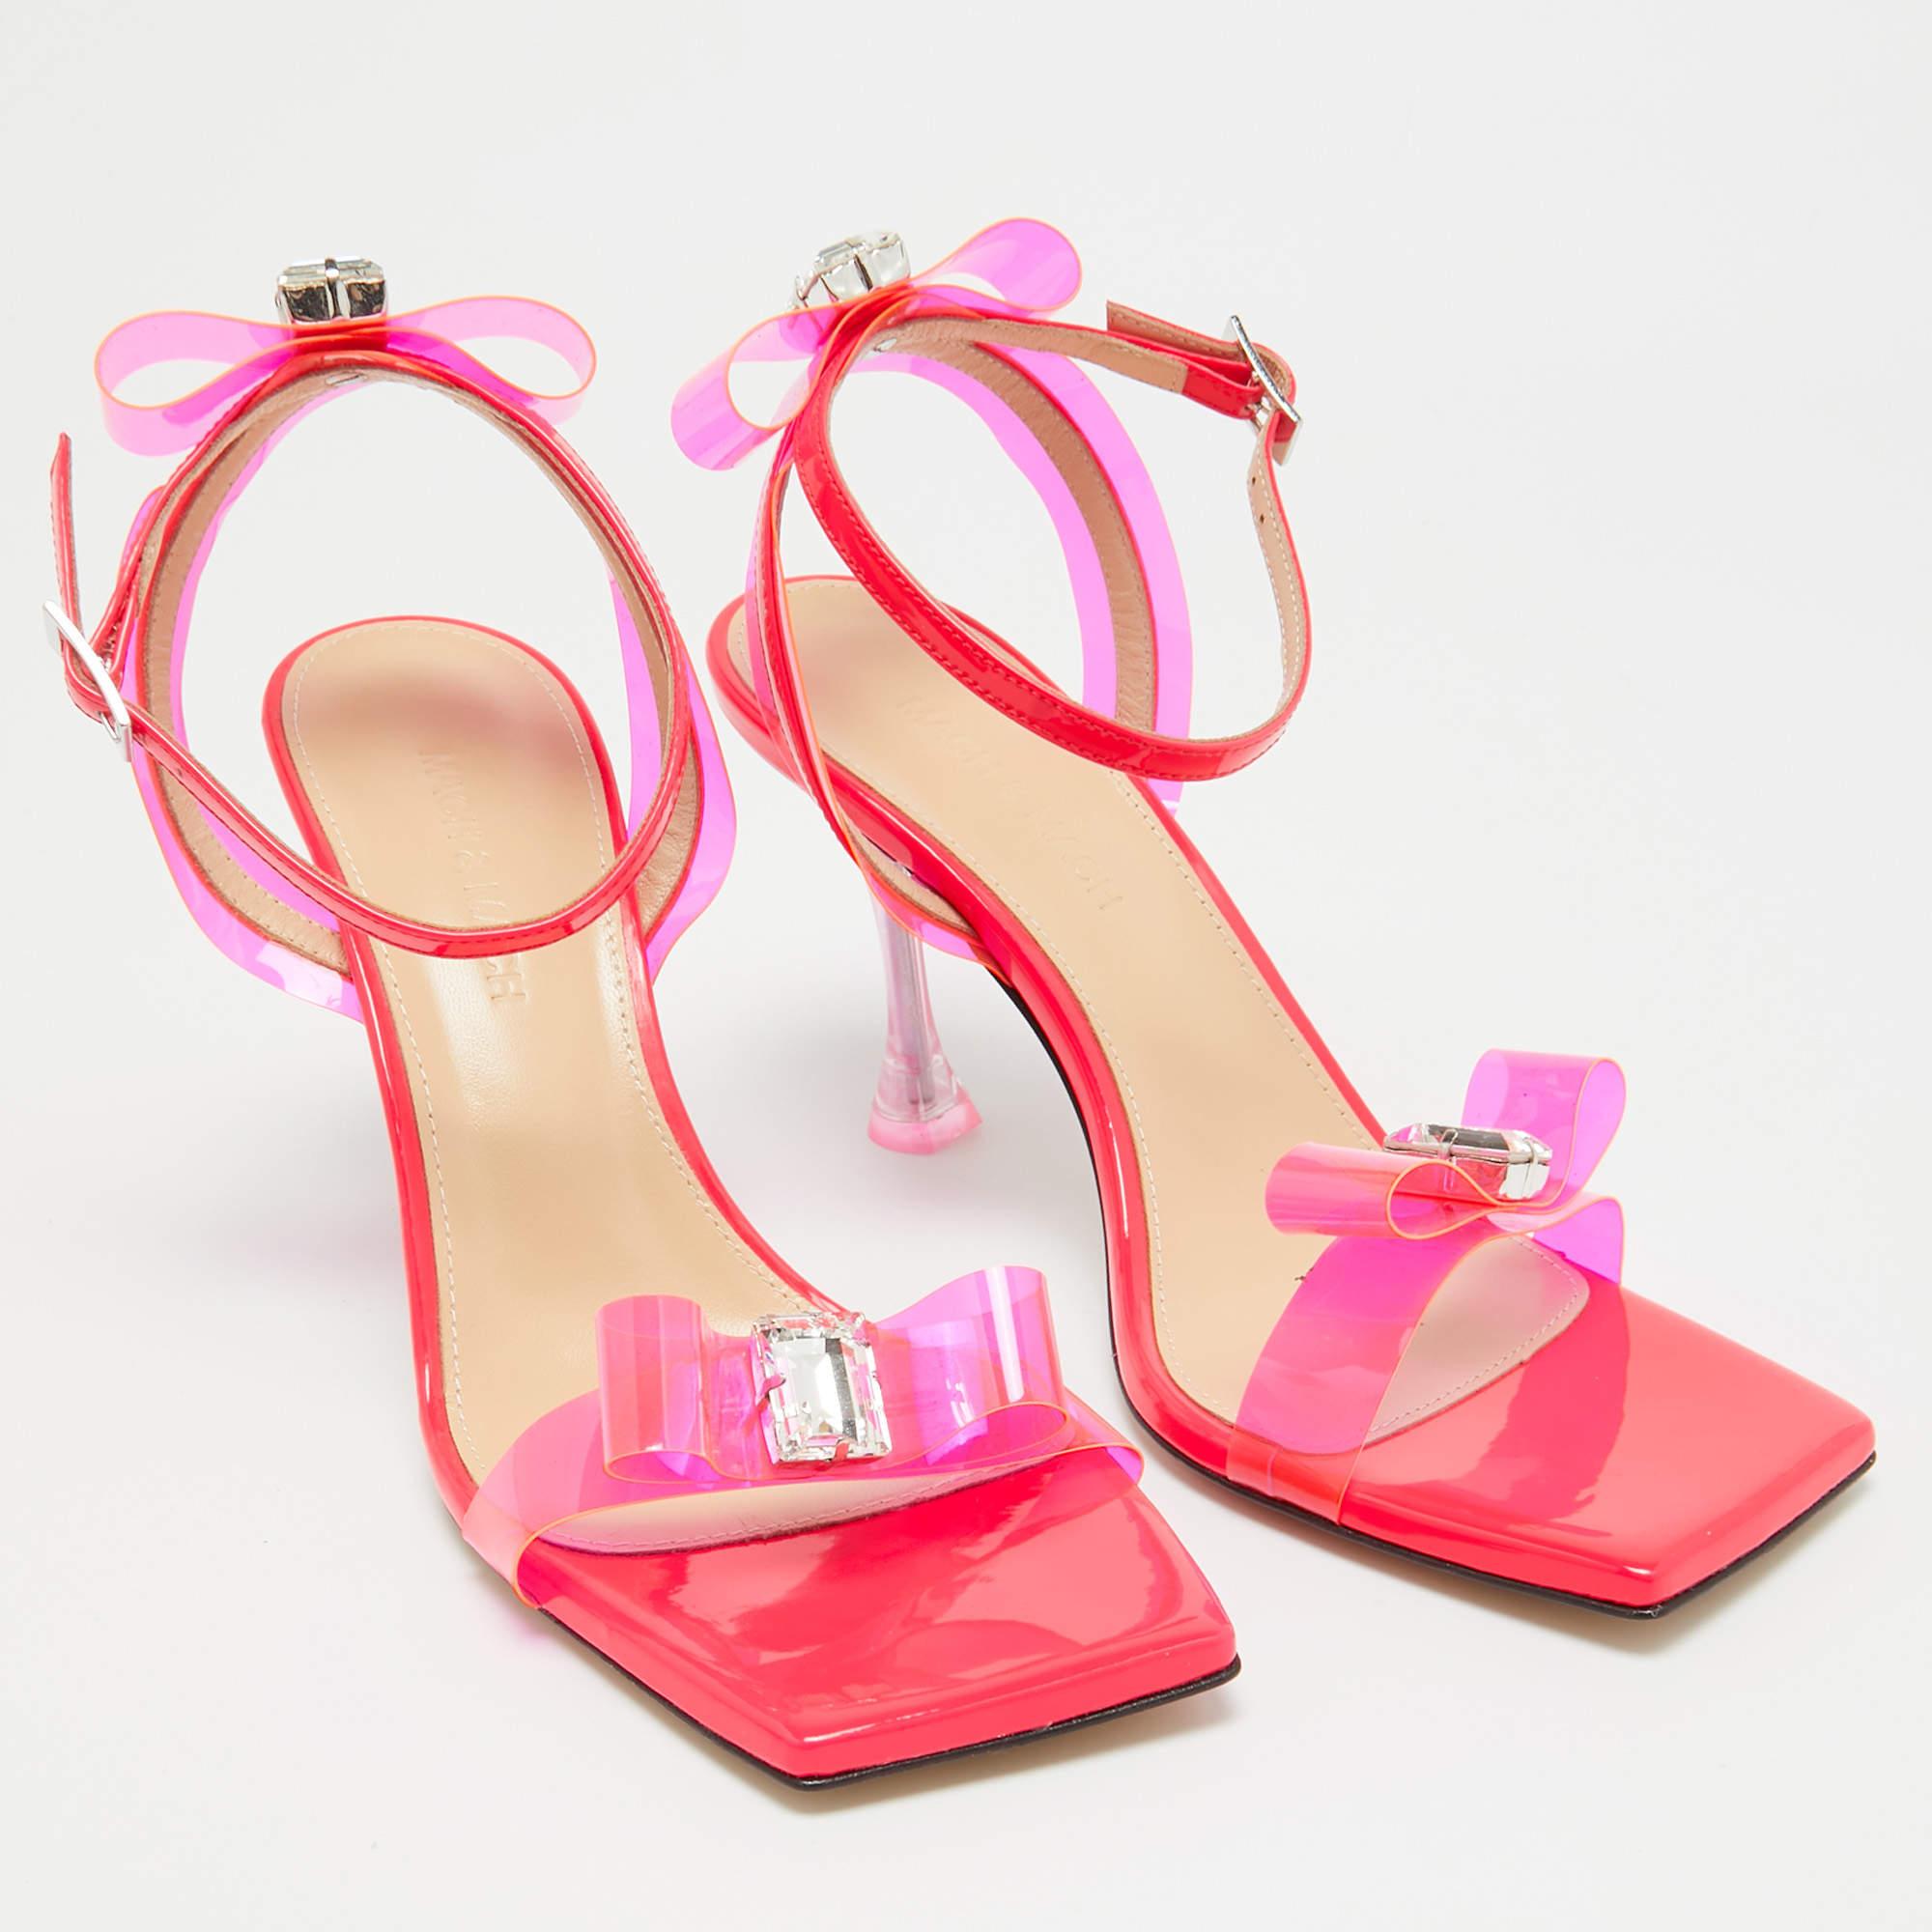 Mach & Mach Neon Pink PVC and Patent Leather French Bow Square Sandals Size 38.5 In Excellent Condition For Sale In Dubai, Al Qouz 2